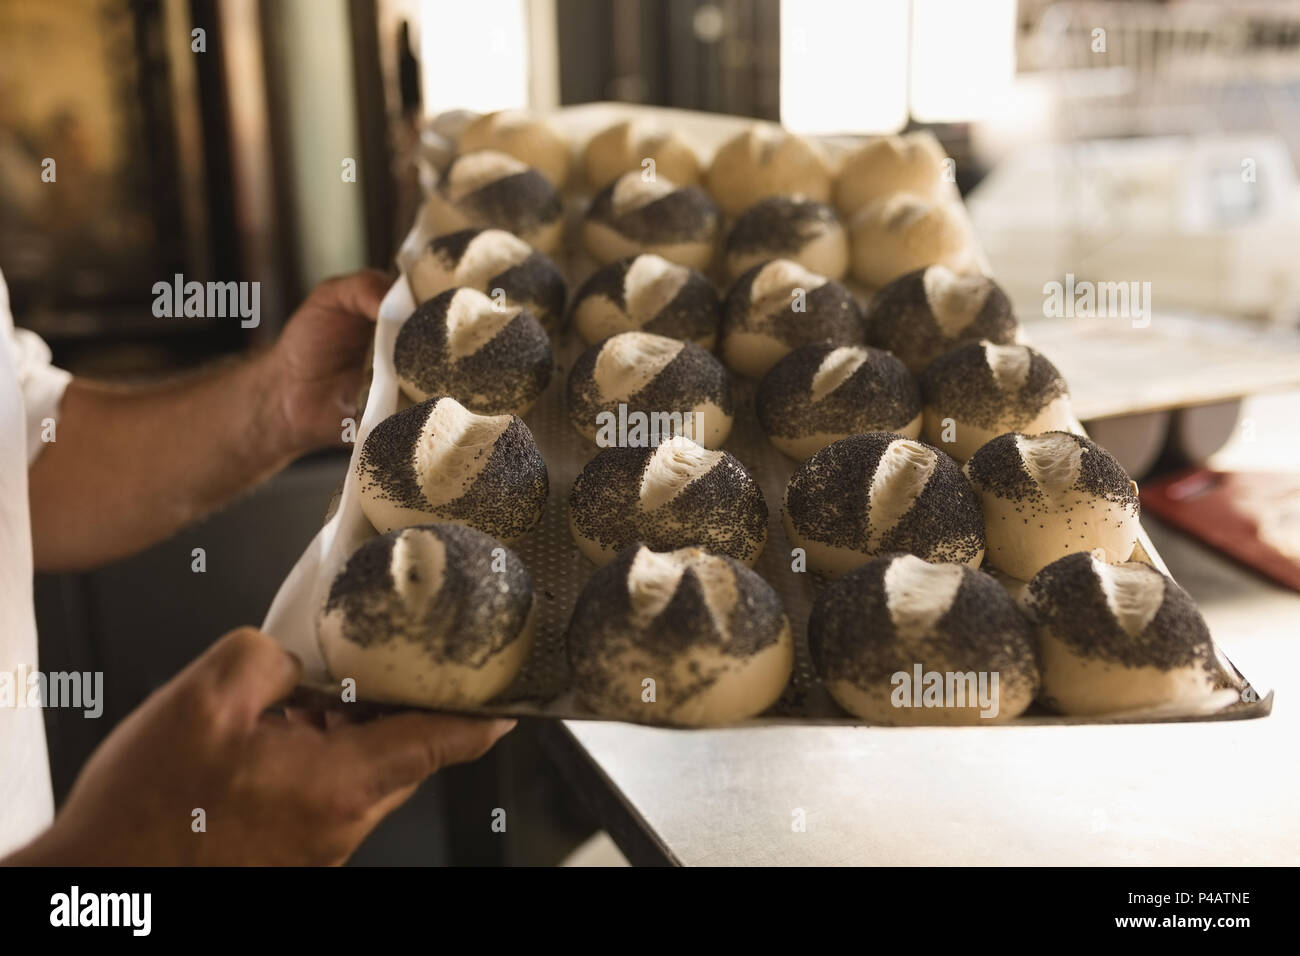 Male baker holding tray of round croissants Banque D'Images